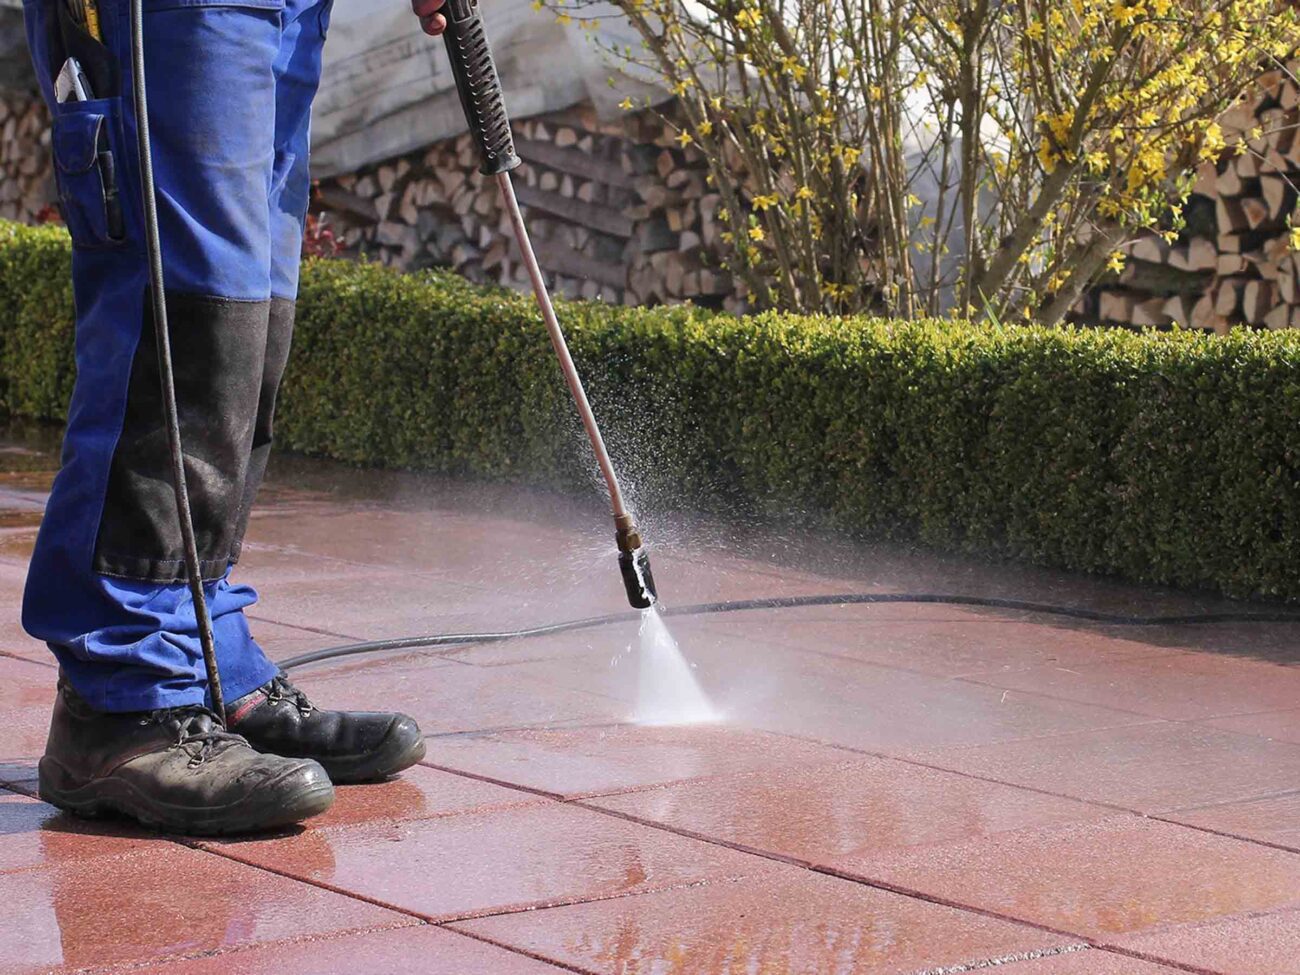 Power washing can be a great way to clean your home but you must use caution. Dive into the details of some of the most common power washing mistakes.